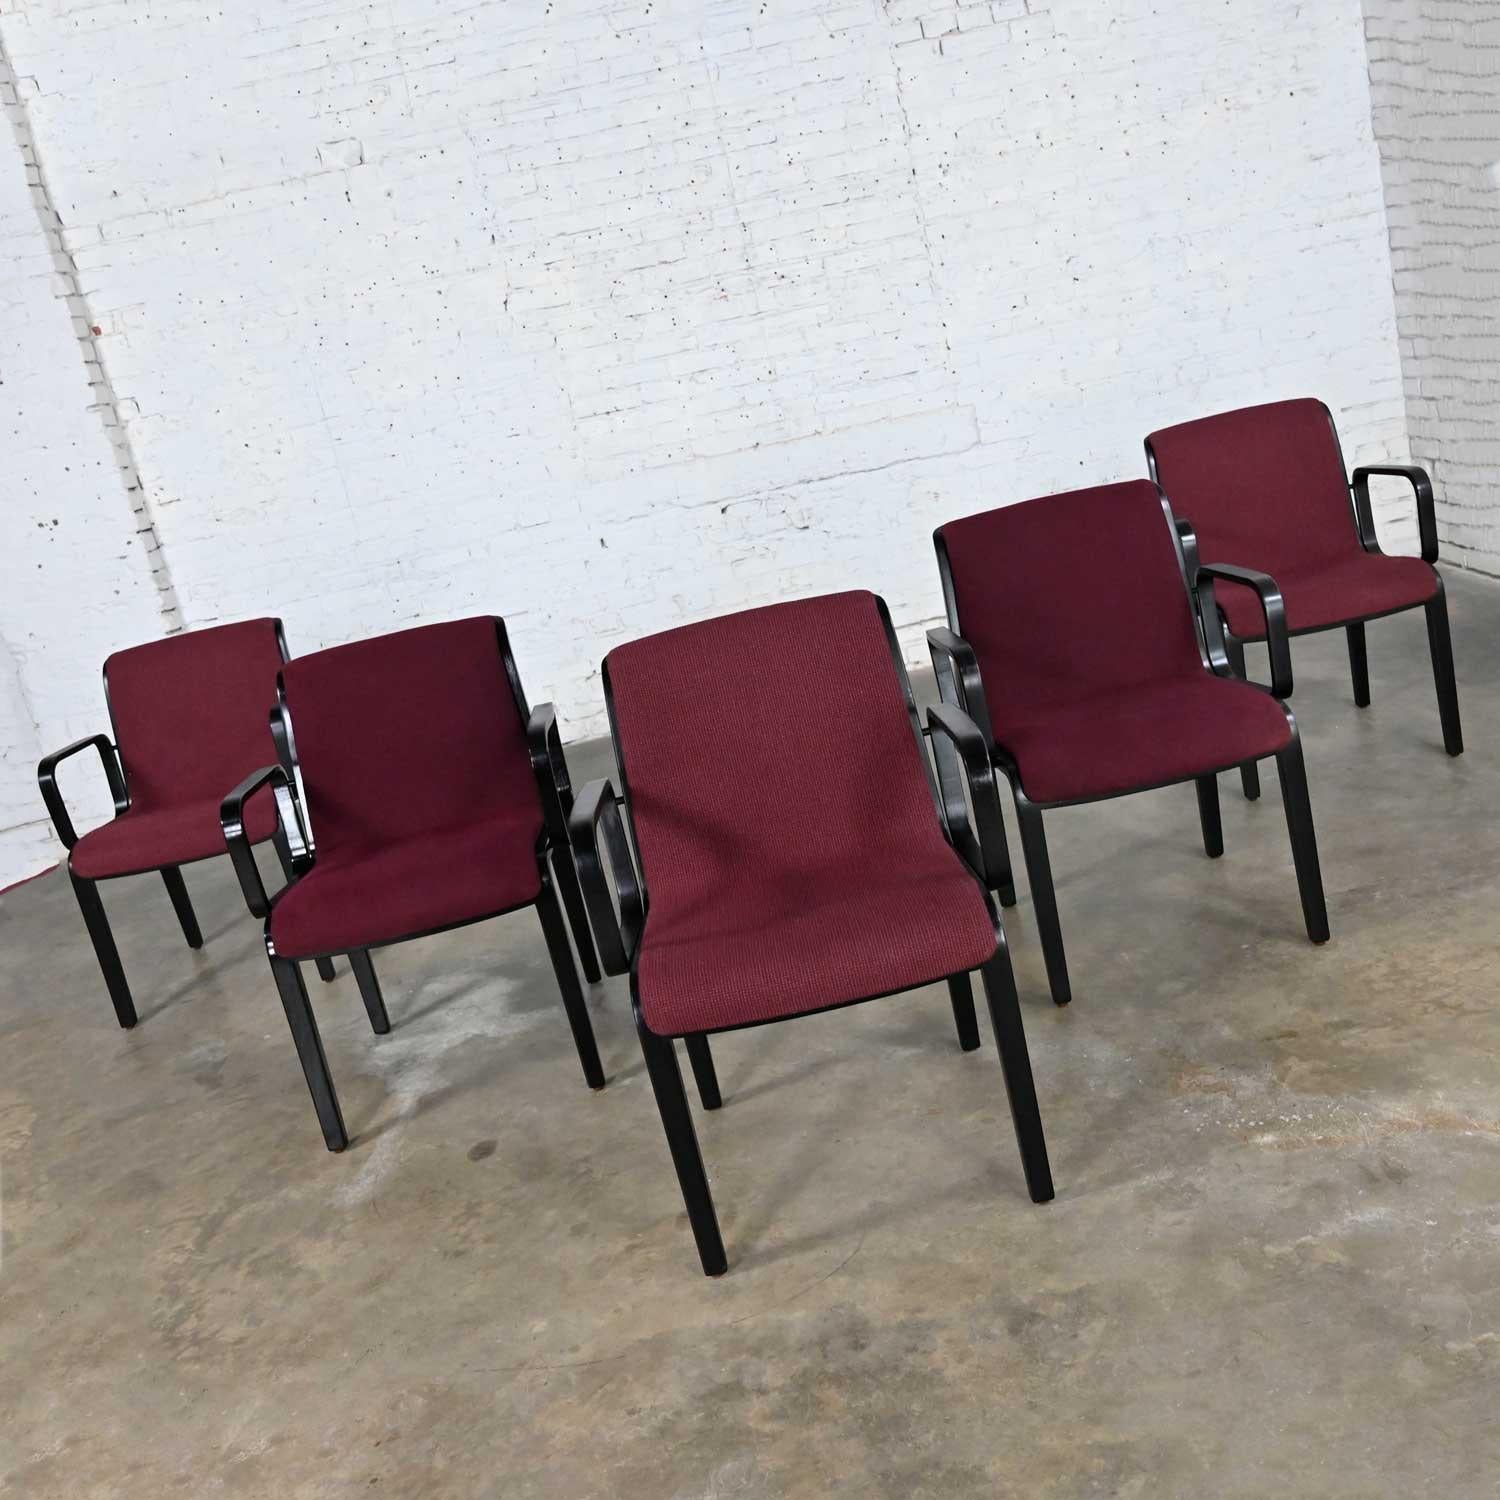 5 Knoll MCM Bentwood 1300 Series Dining Chairs Maroon & Black by Bill Stephens For Sale 4